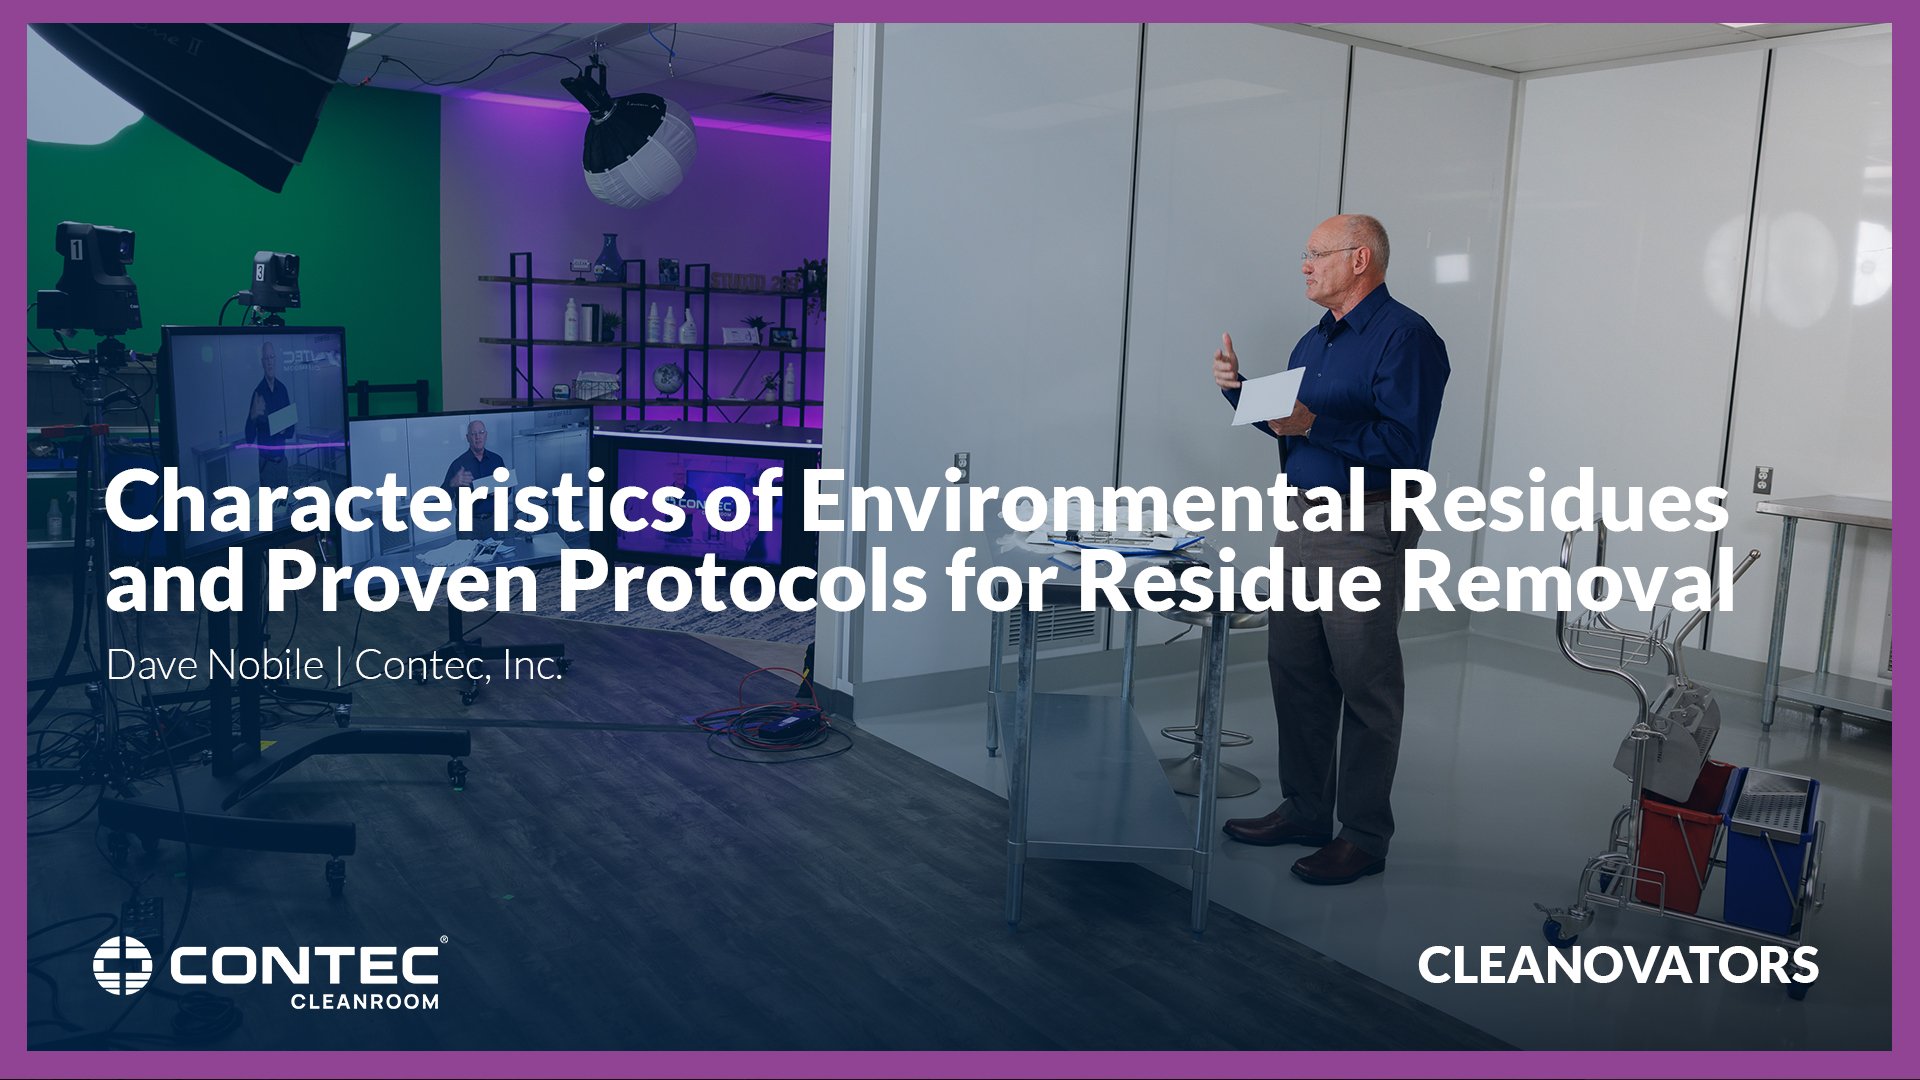 Characteristics of Environmental Residues and Proven Protocols for Residue Removal